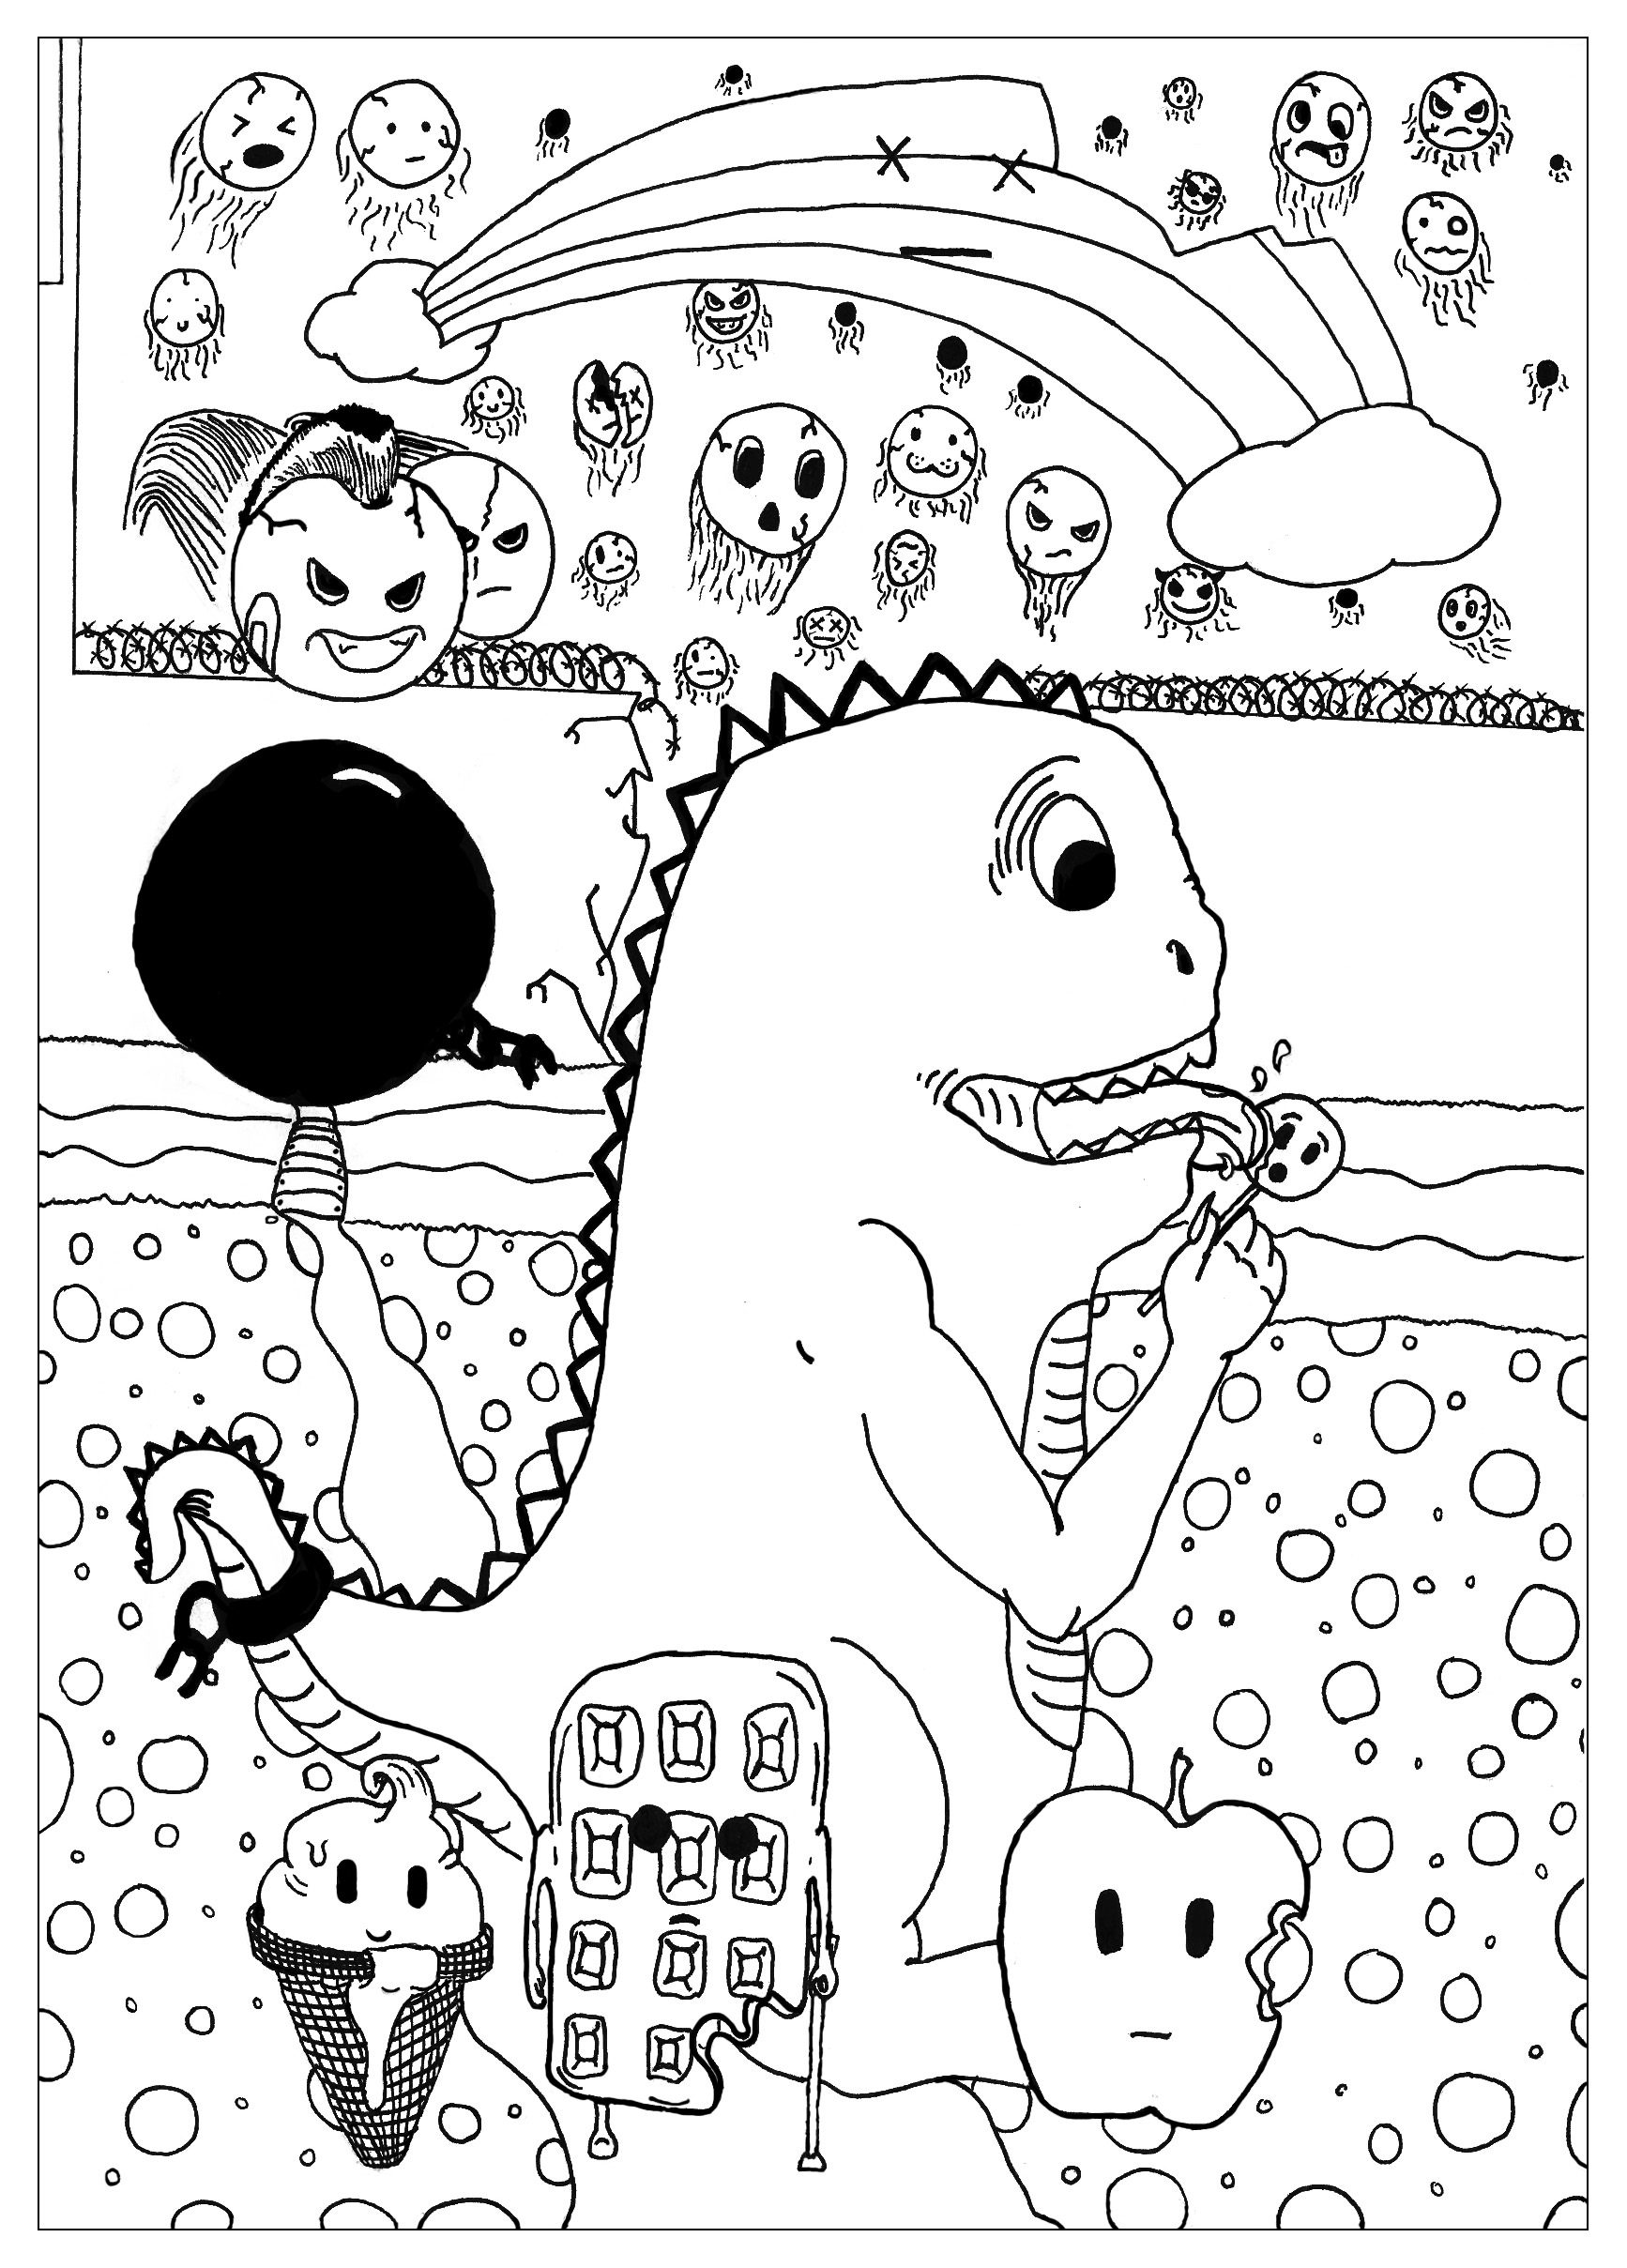 Doodle art free to color for children   Doodle Art Kids Coloring Pages